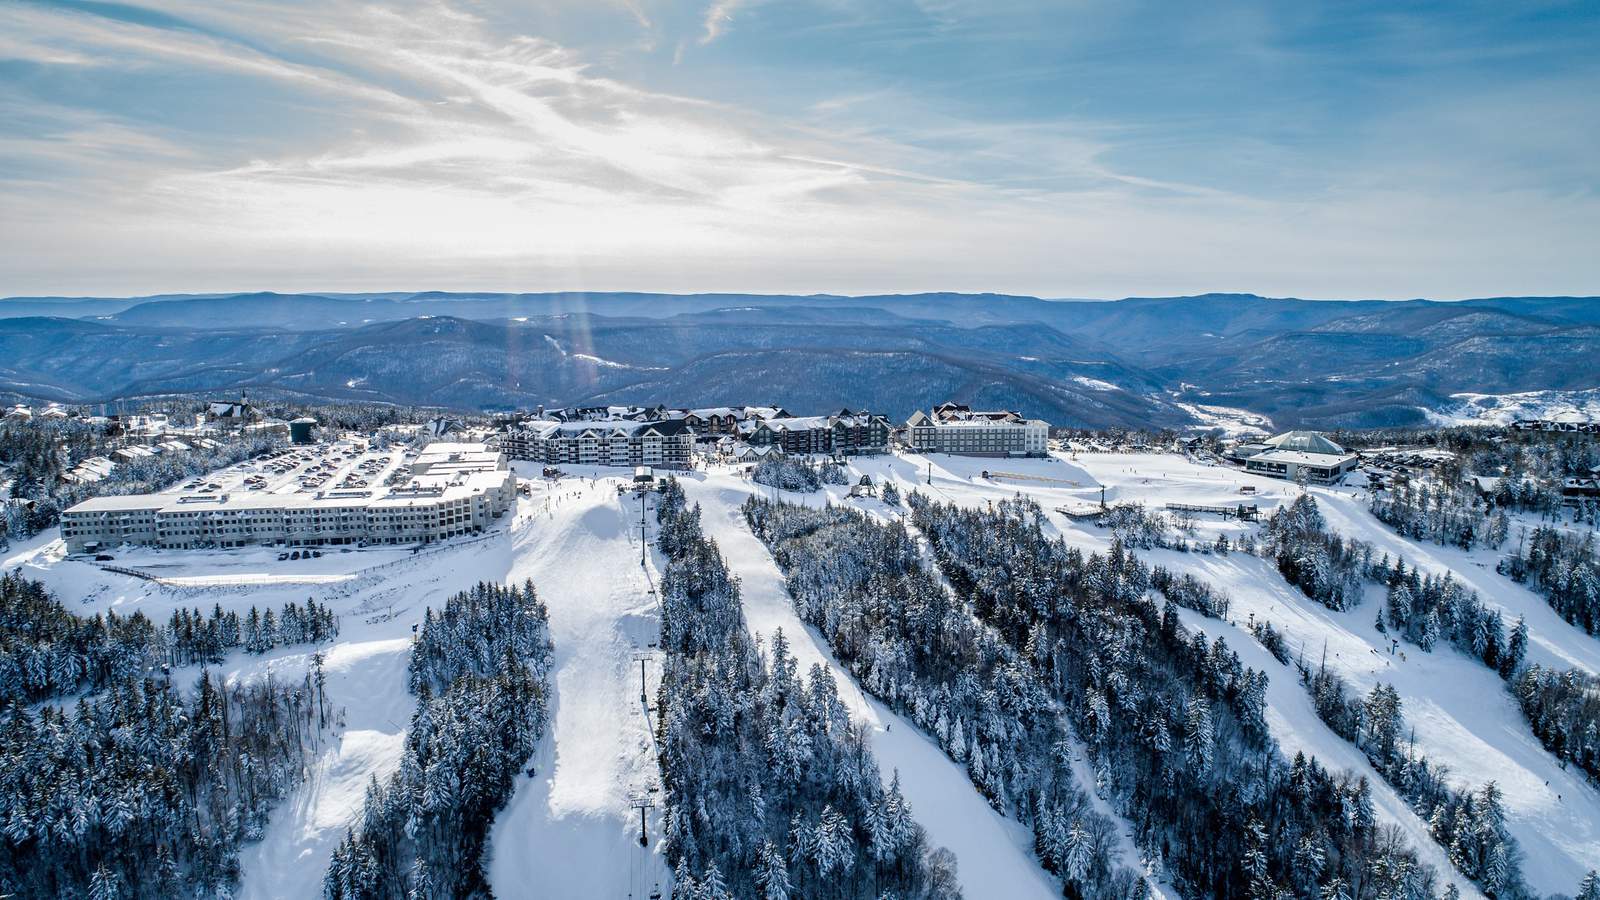 Snowshoe Mountain to reopen for skiing, snowboarding on Dec. 4